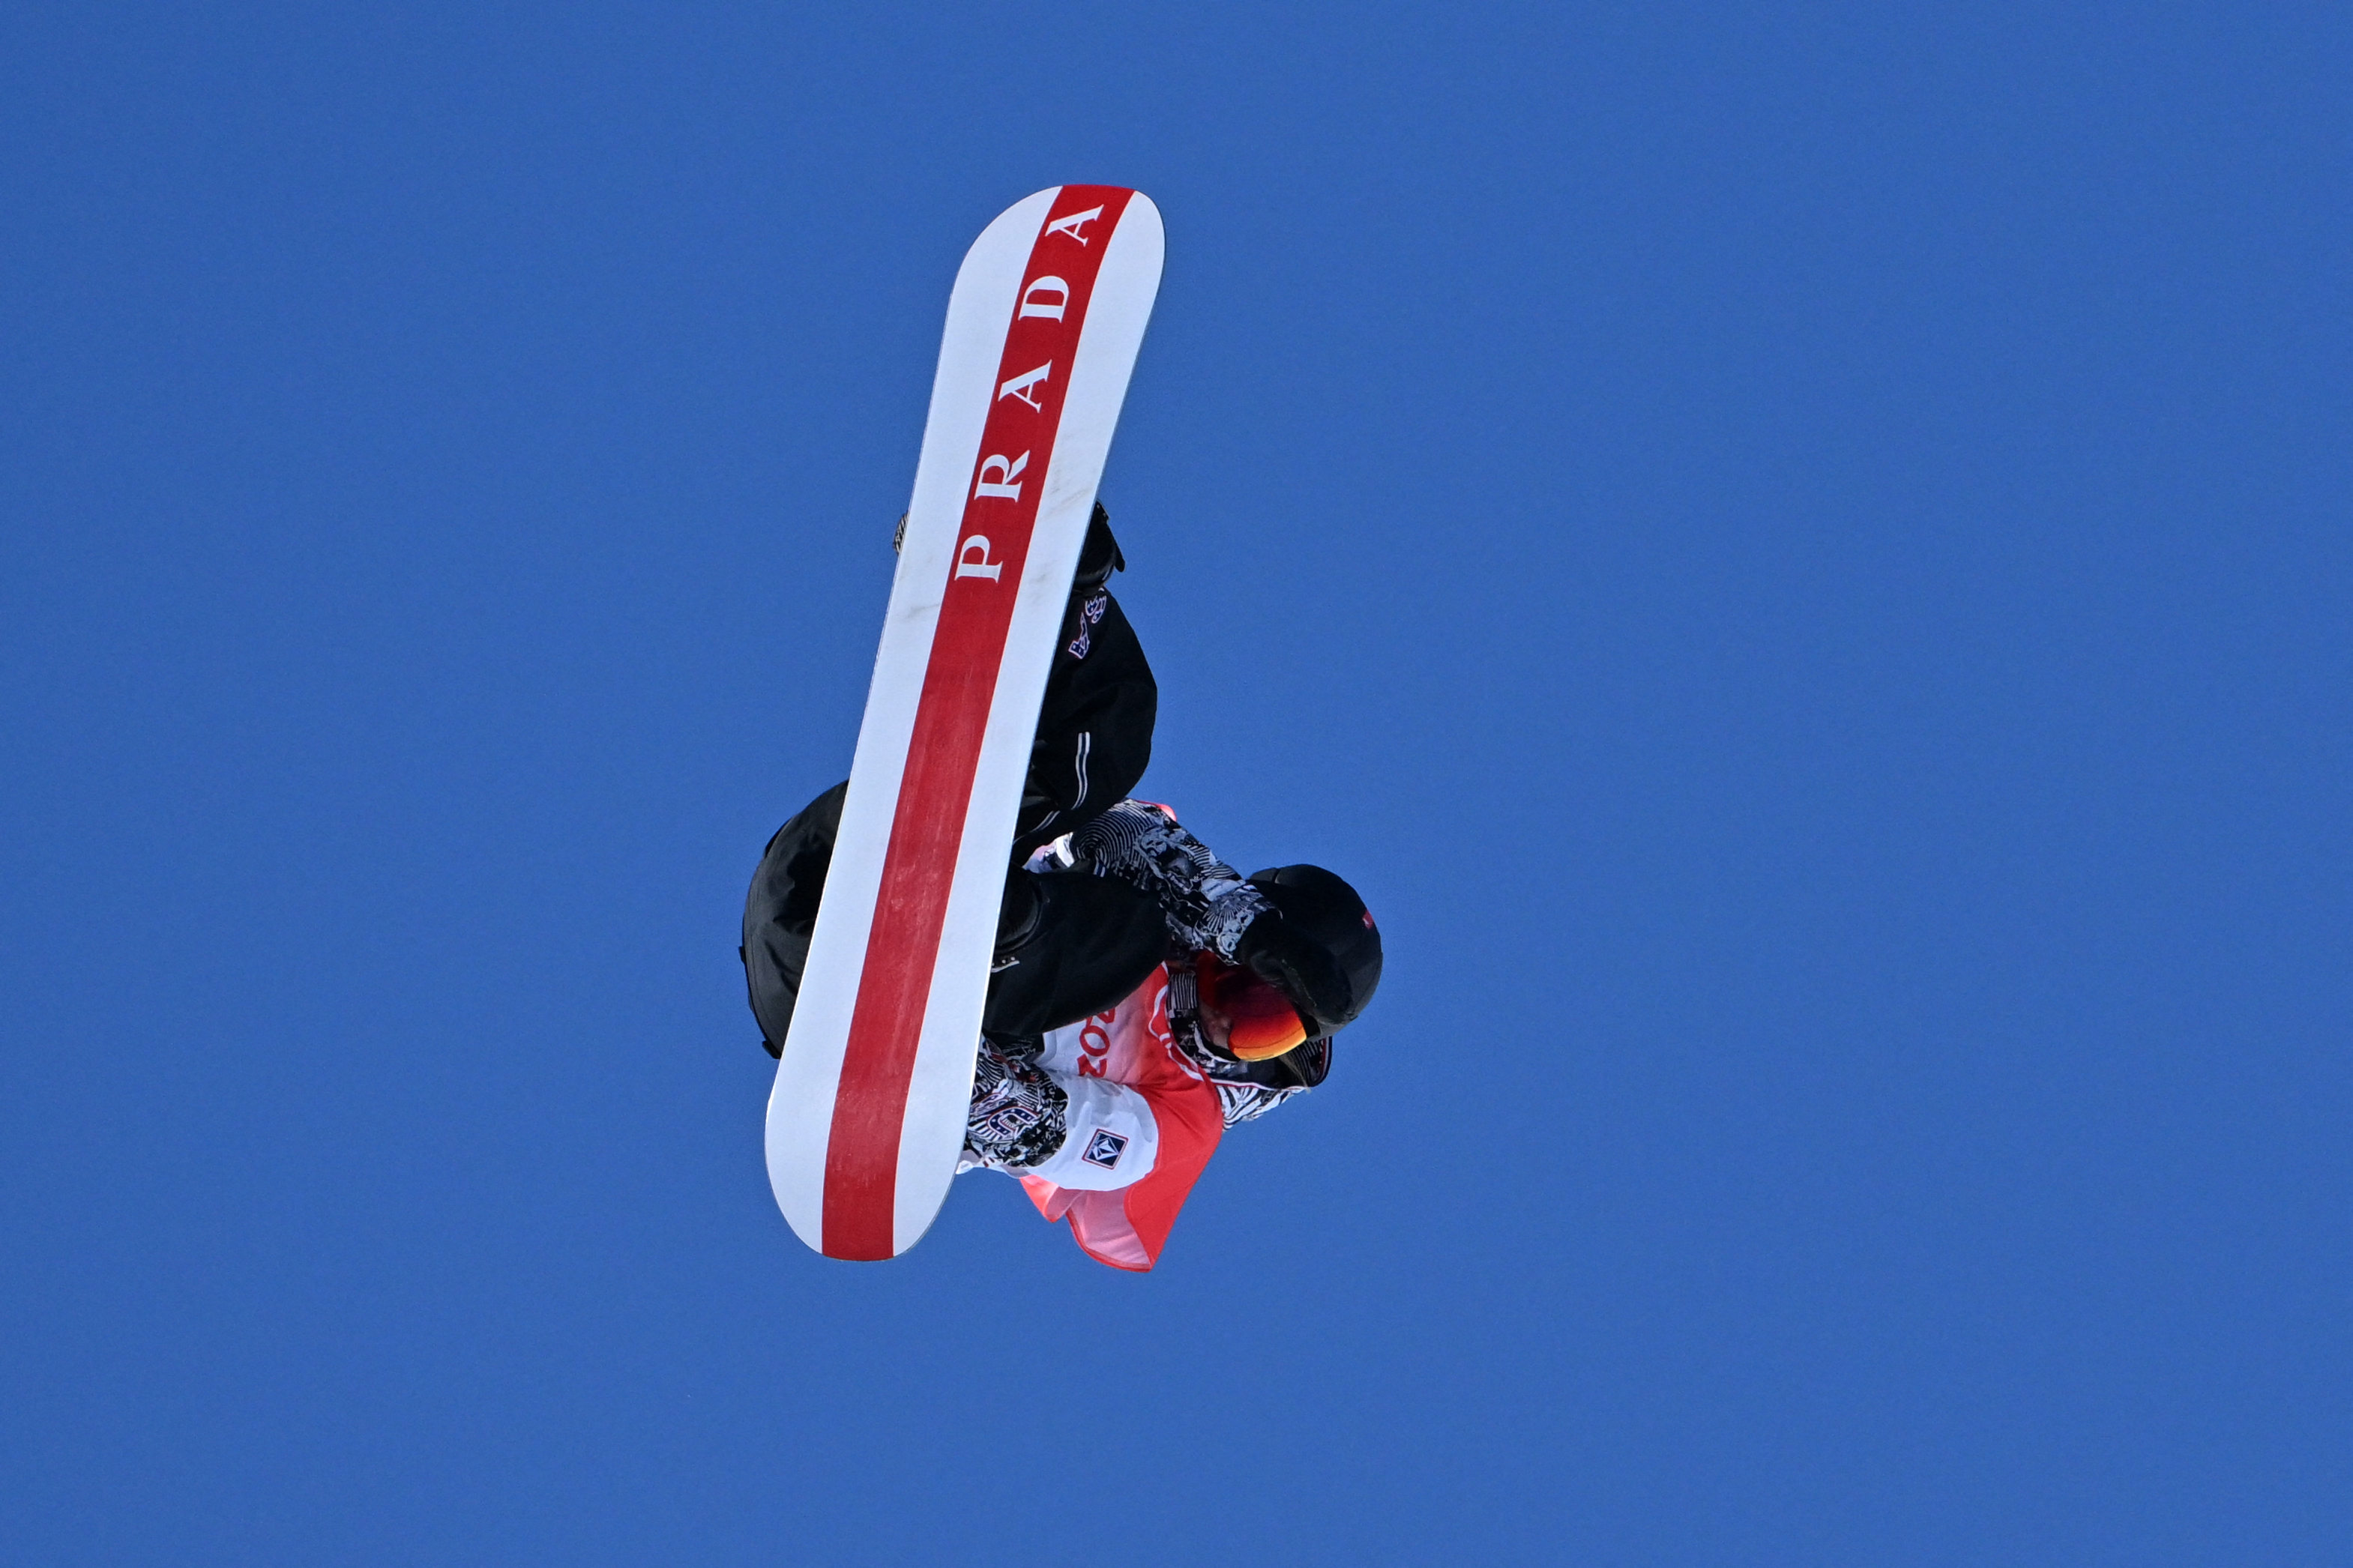 Prada Snowboard Part of Reason Julia Marino Withdrew from Big Air Competition